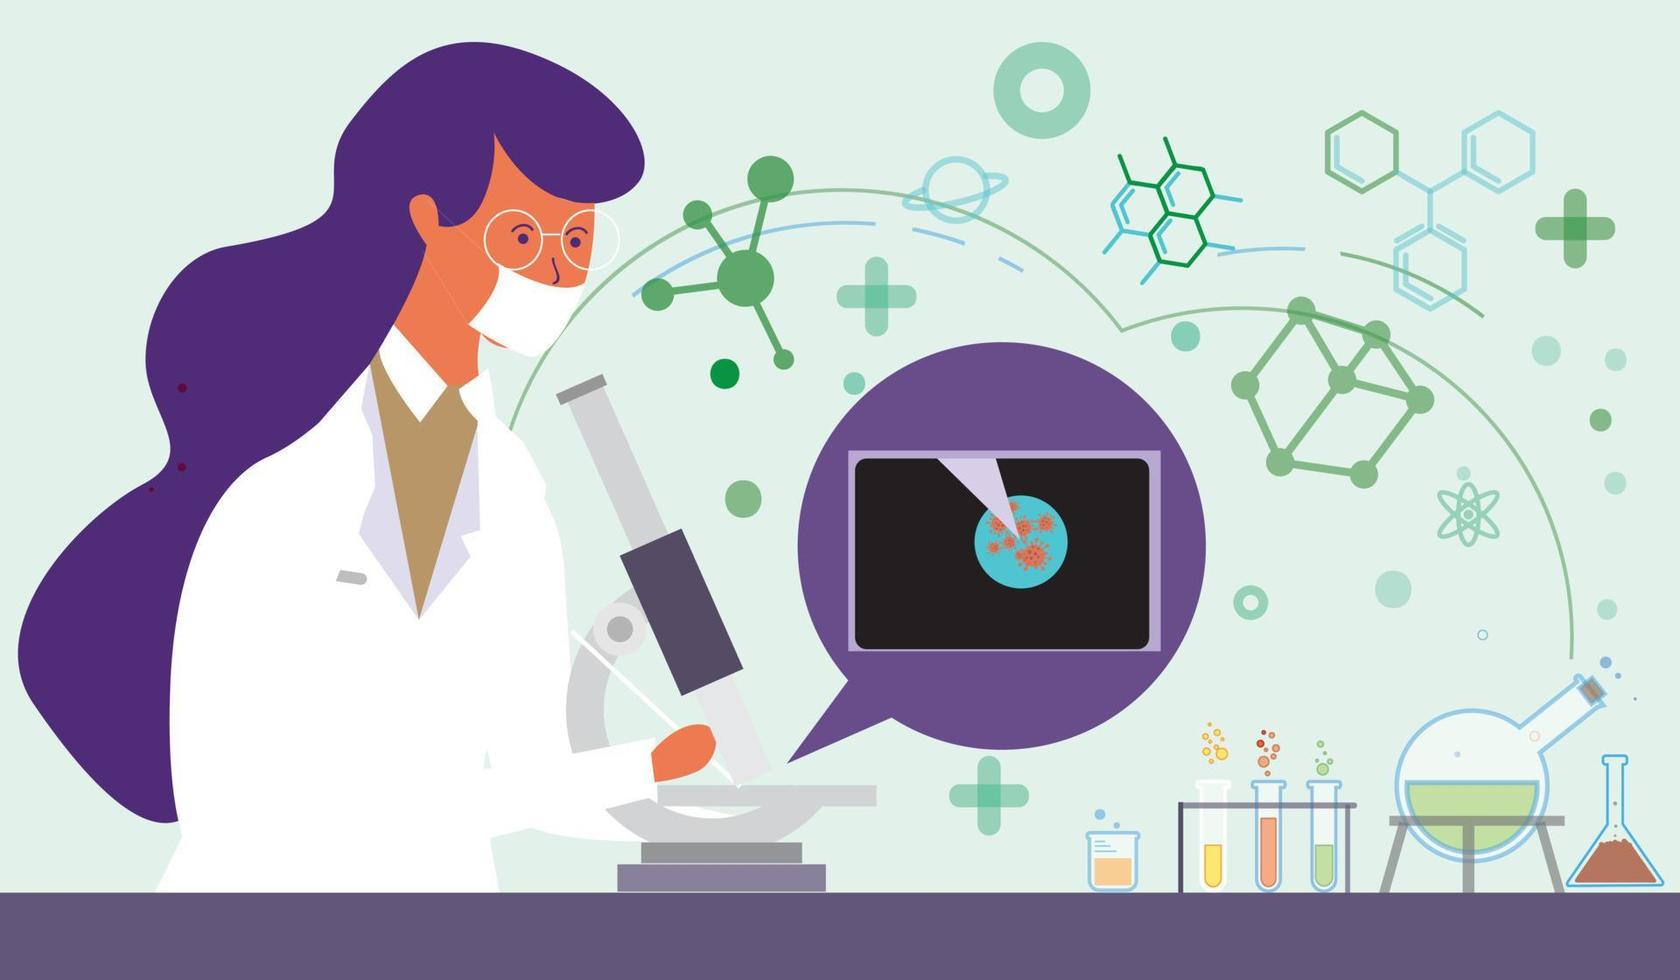 Scientist at work, male character conducting experiments with microscope. Vector illustration in flat style